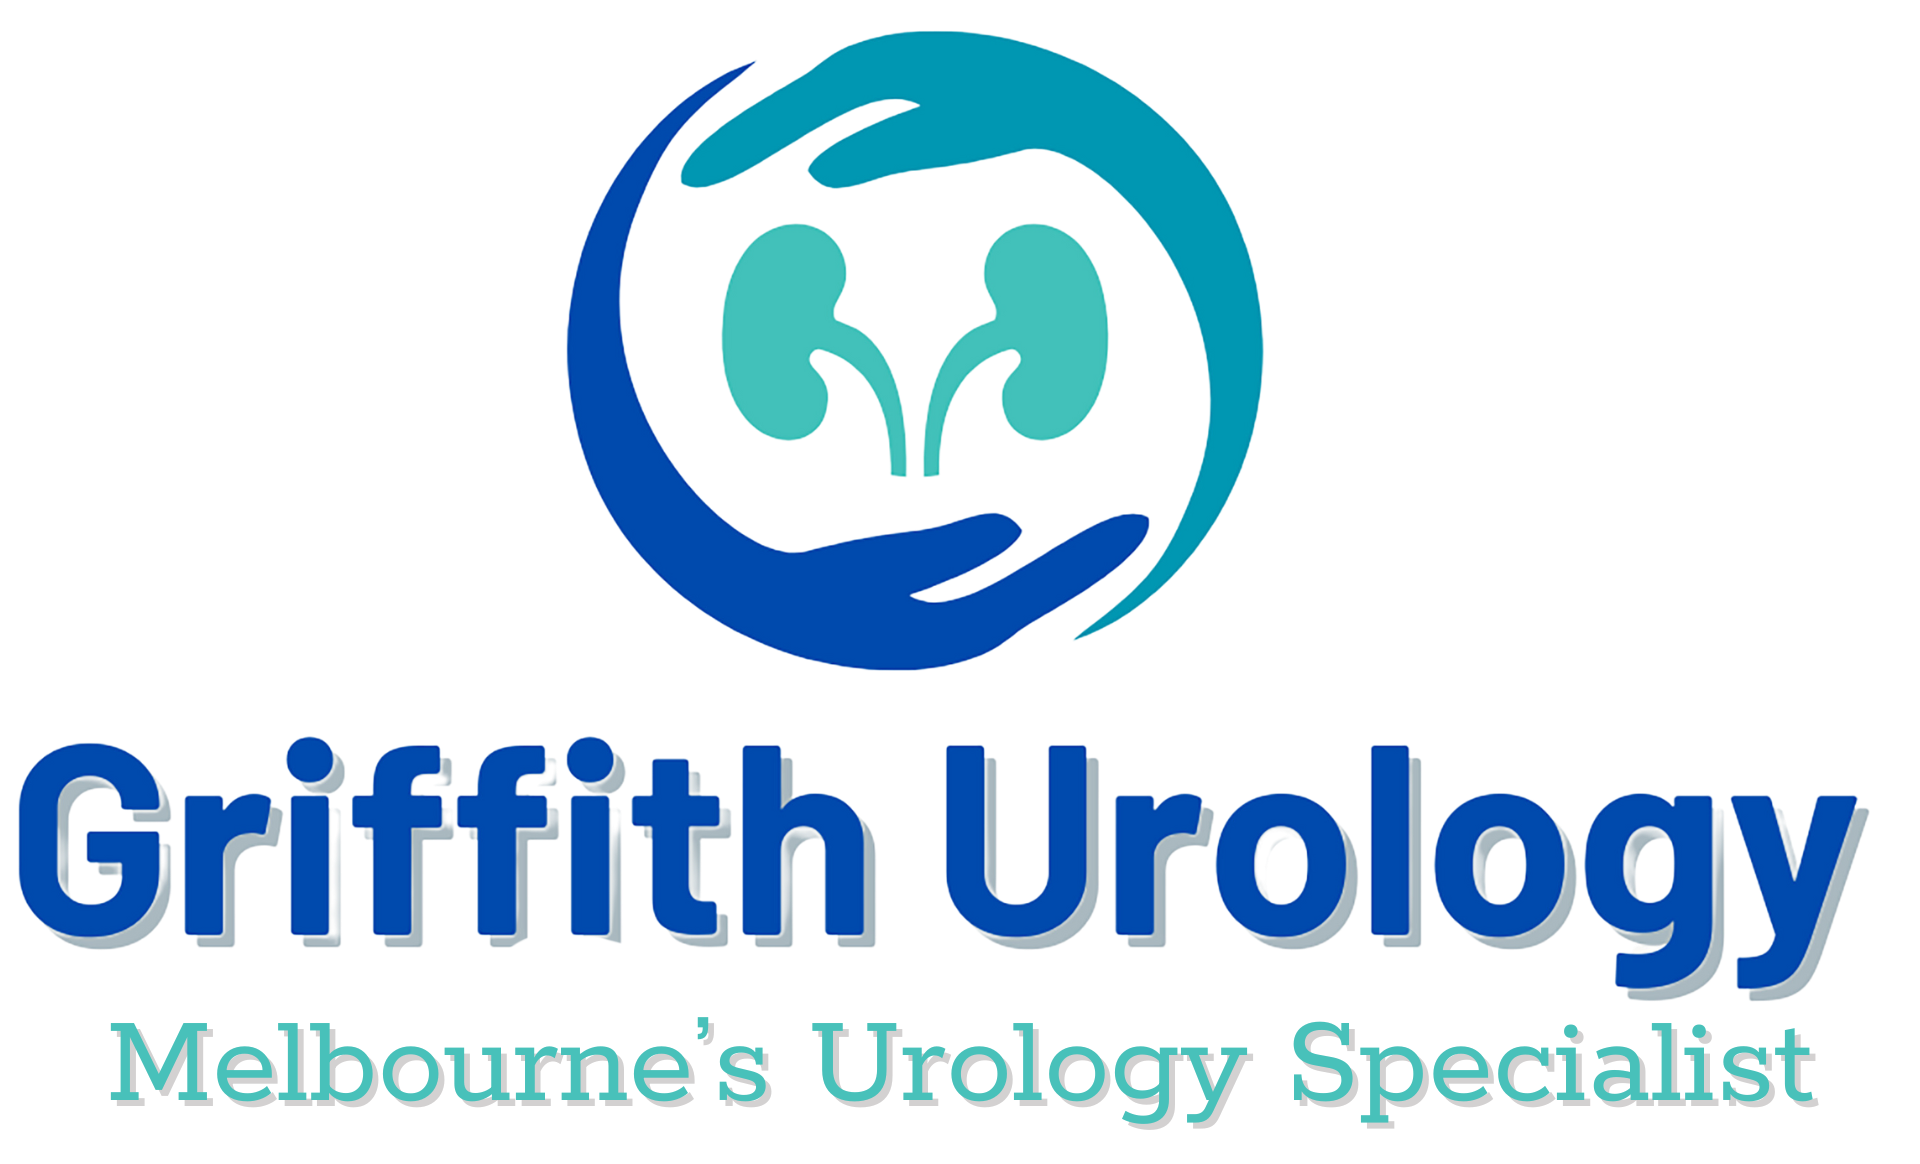 The logo for griffith urology melbourne 's urology specialist